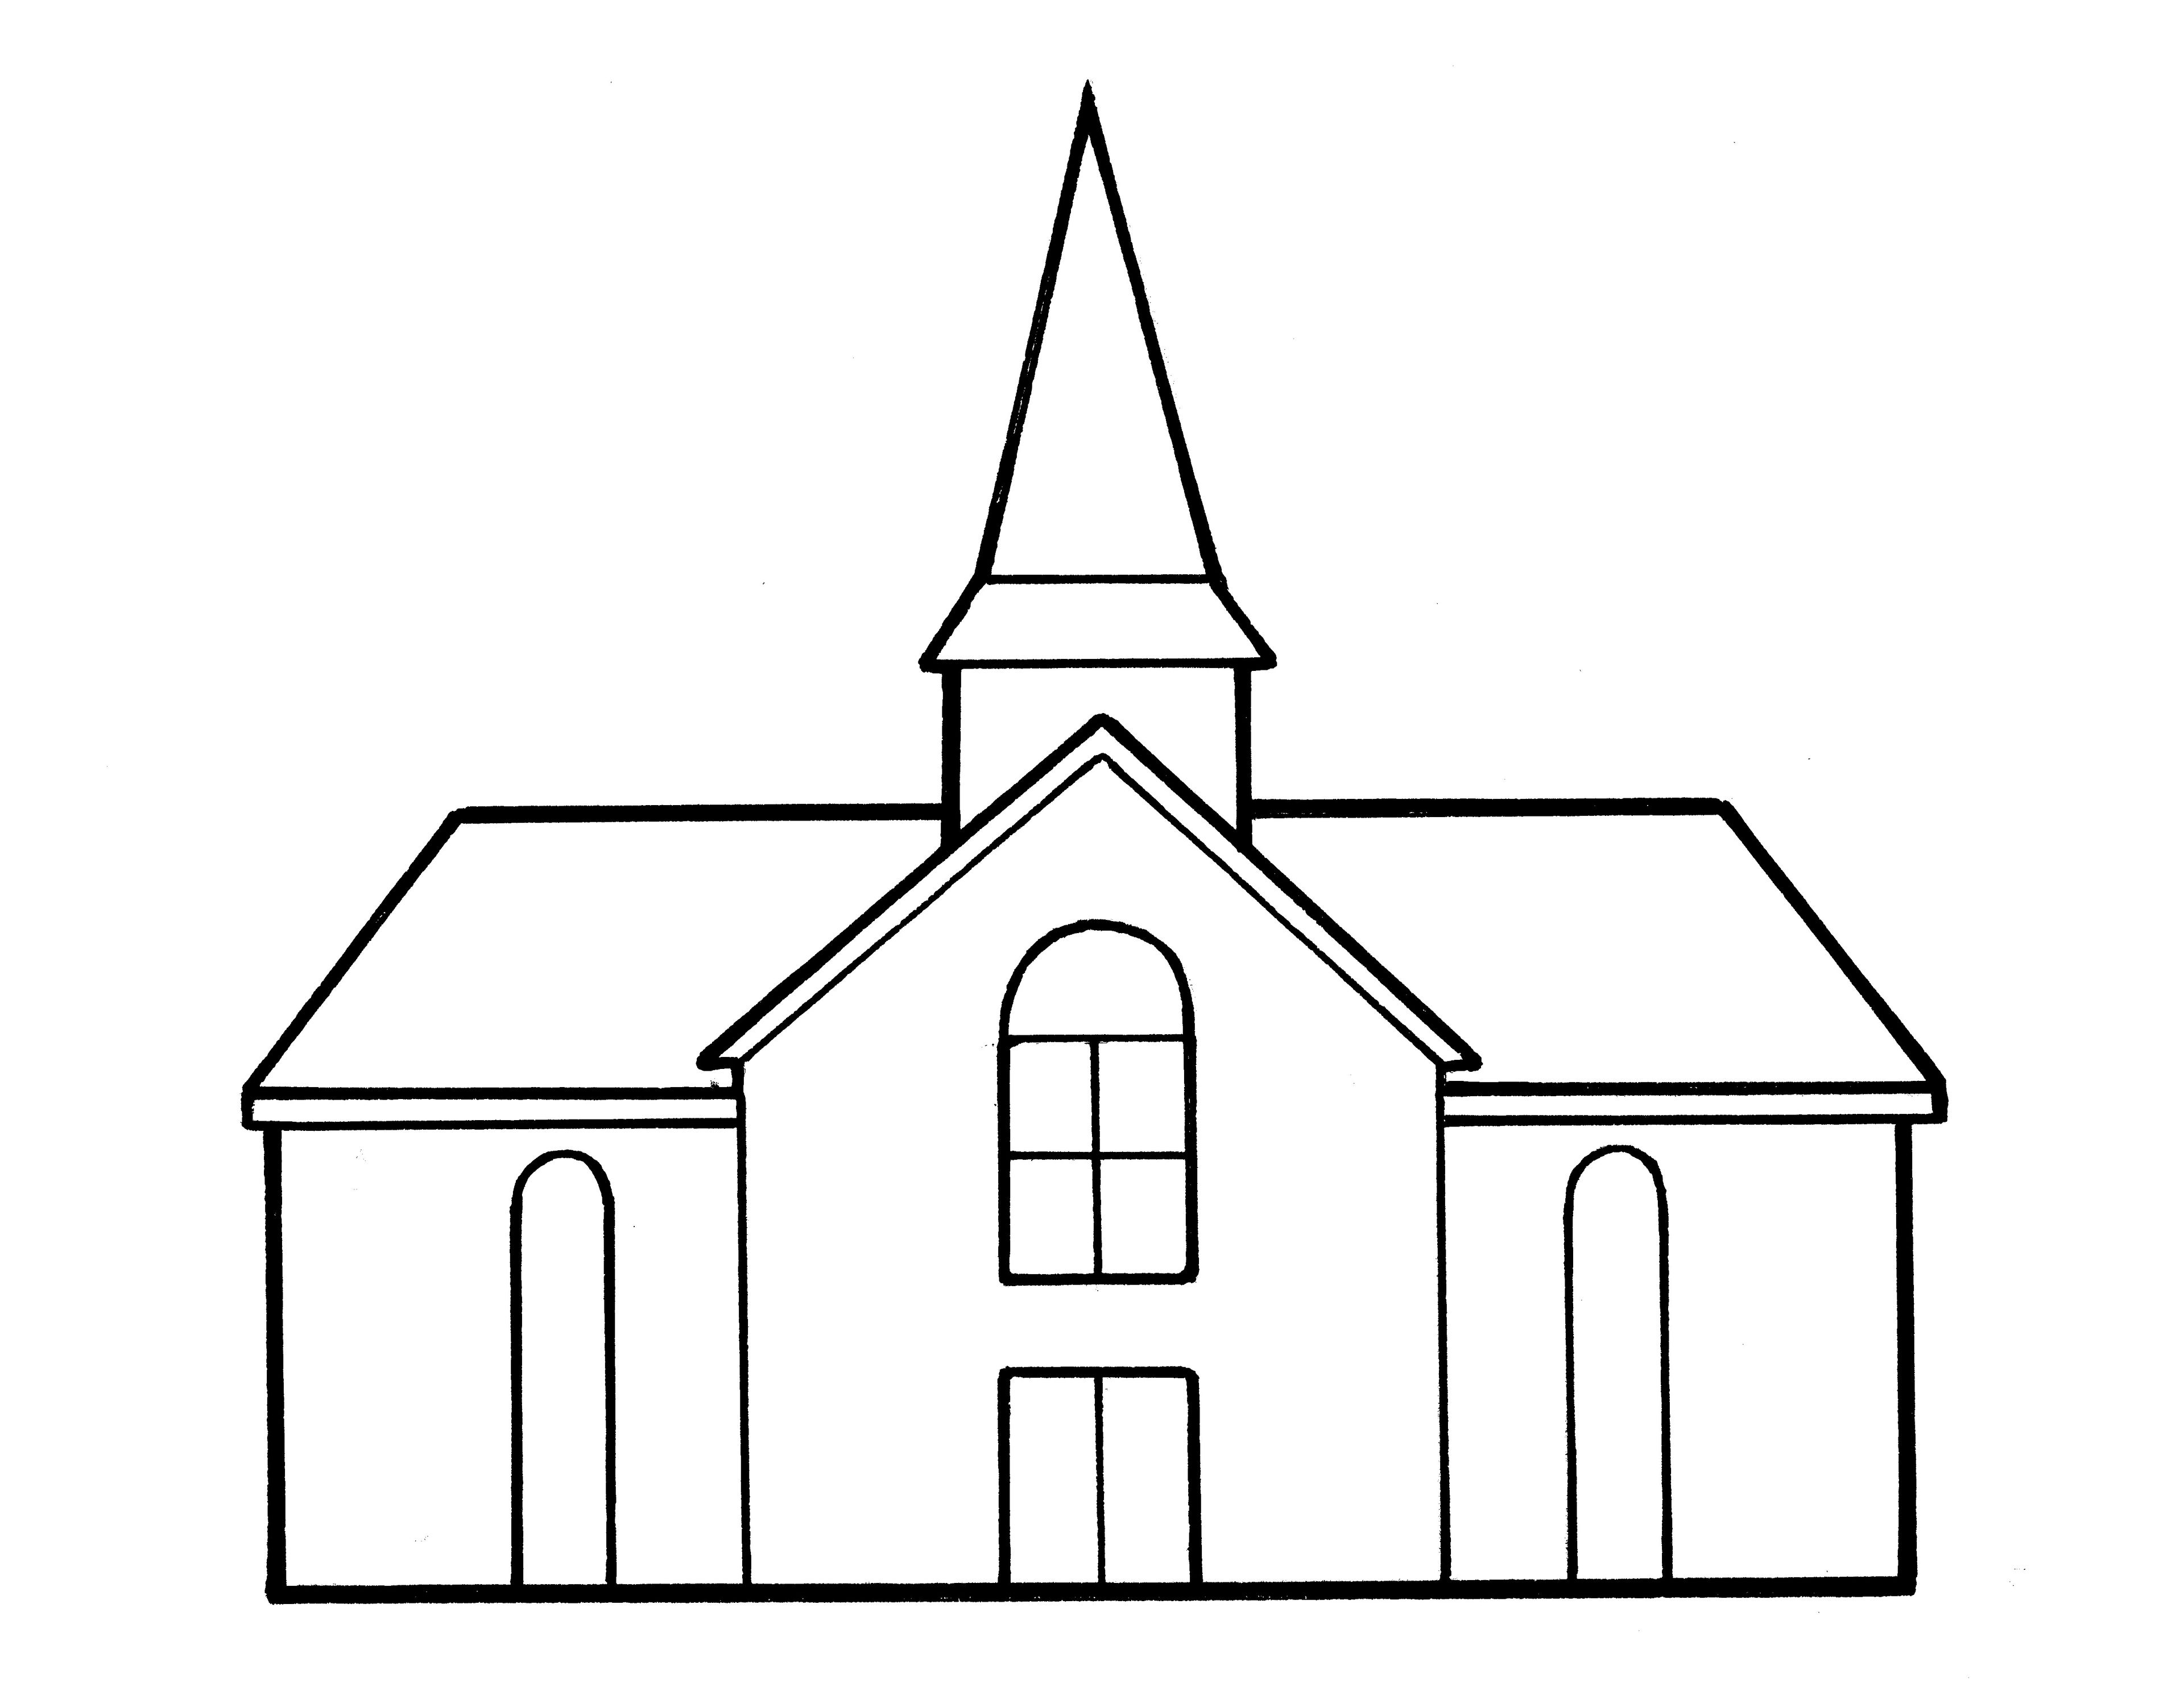 A line drawing of a meetinghouse from the nursery manual Behold Your Little Ones (2008), pages 31 and 39.